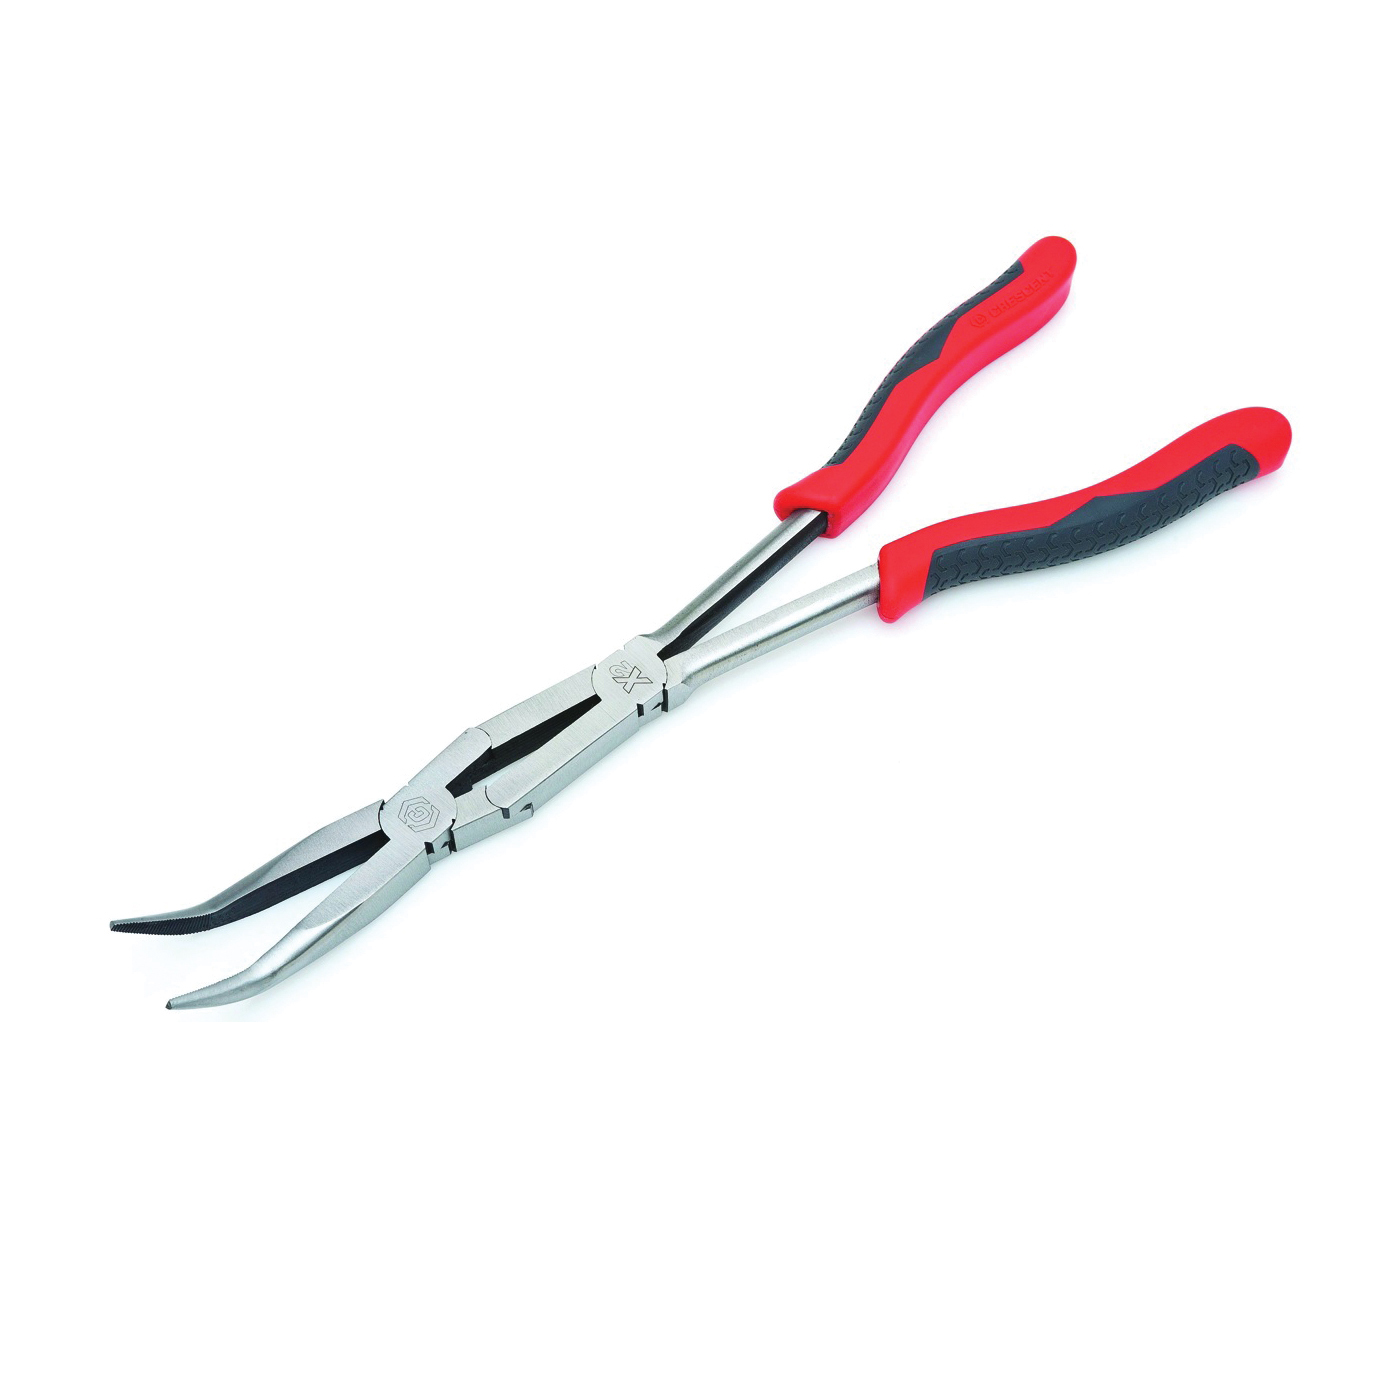 PSX201C Nose Plier, 13.27 in OAL, 4 in Jaw Opening, Black/Red Handle, Comfort-Grip Handle, 2-1/2 in L Jaw